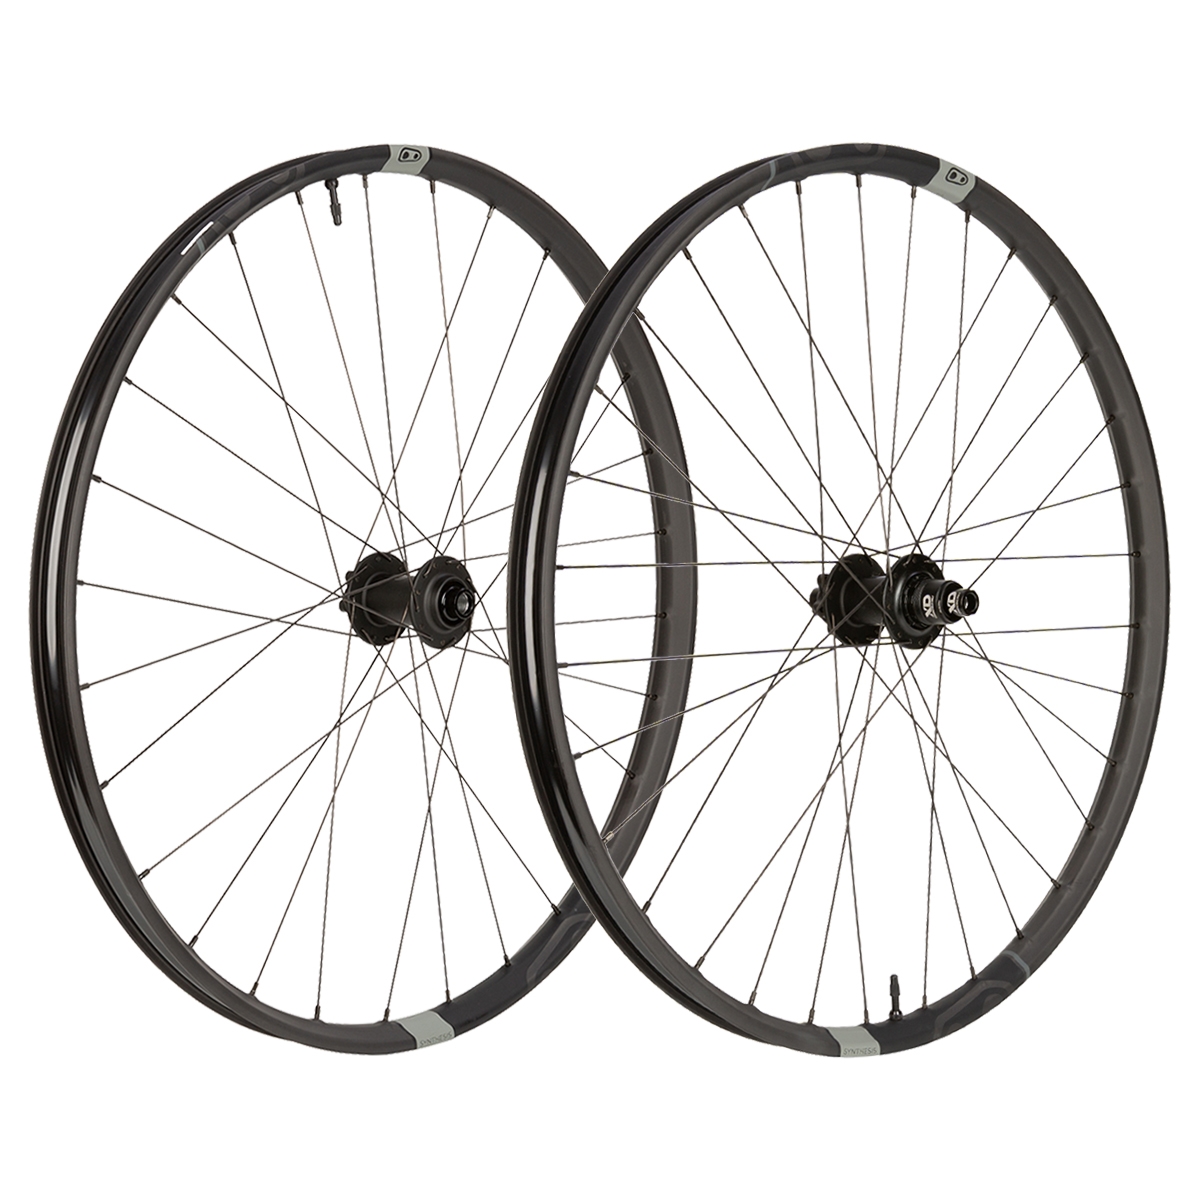 Crankbrothers Wheel Set Synthesis Carbon 29 Inch, 15x110 mm/12x148 mm Sram XD, Tubeless Ready | Maciag Offroad